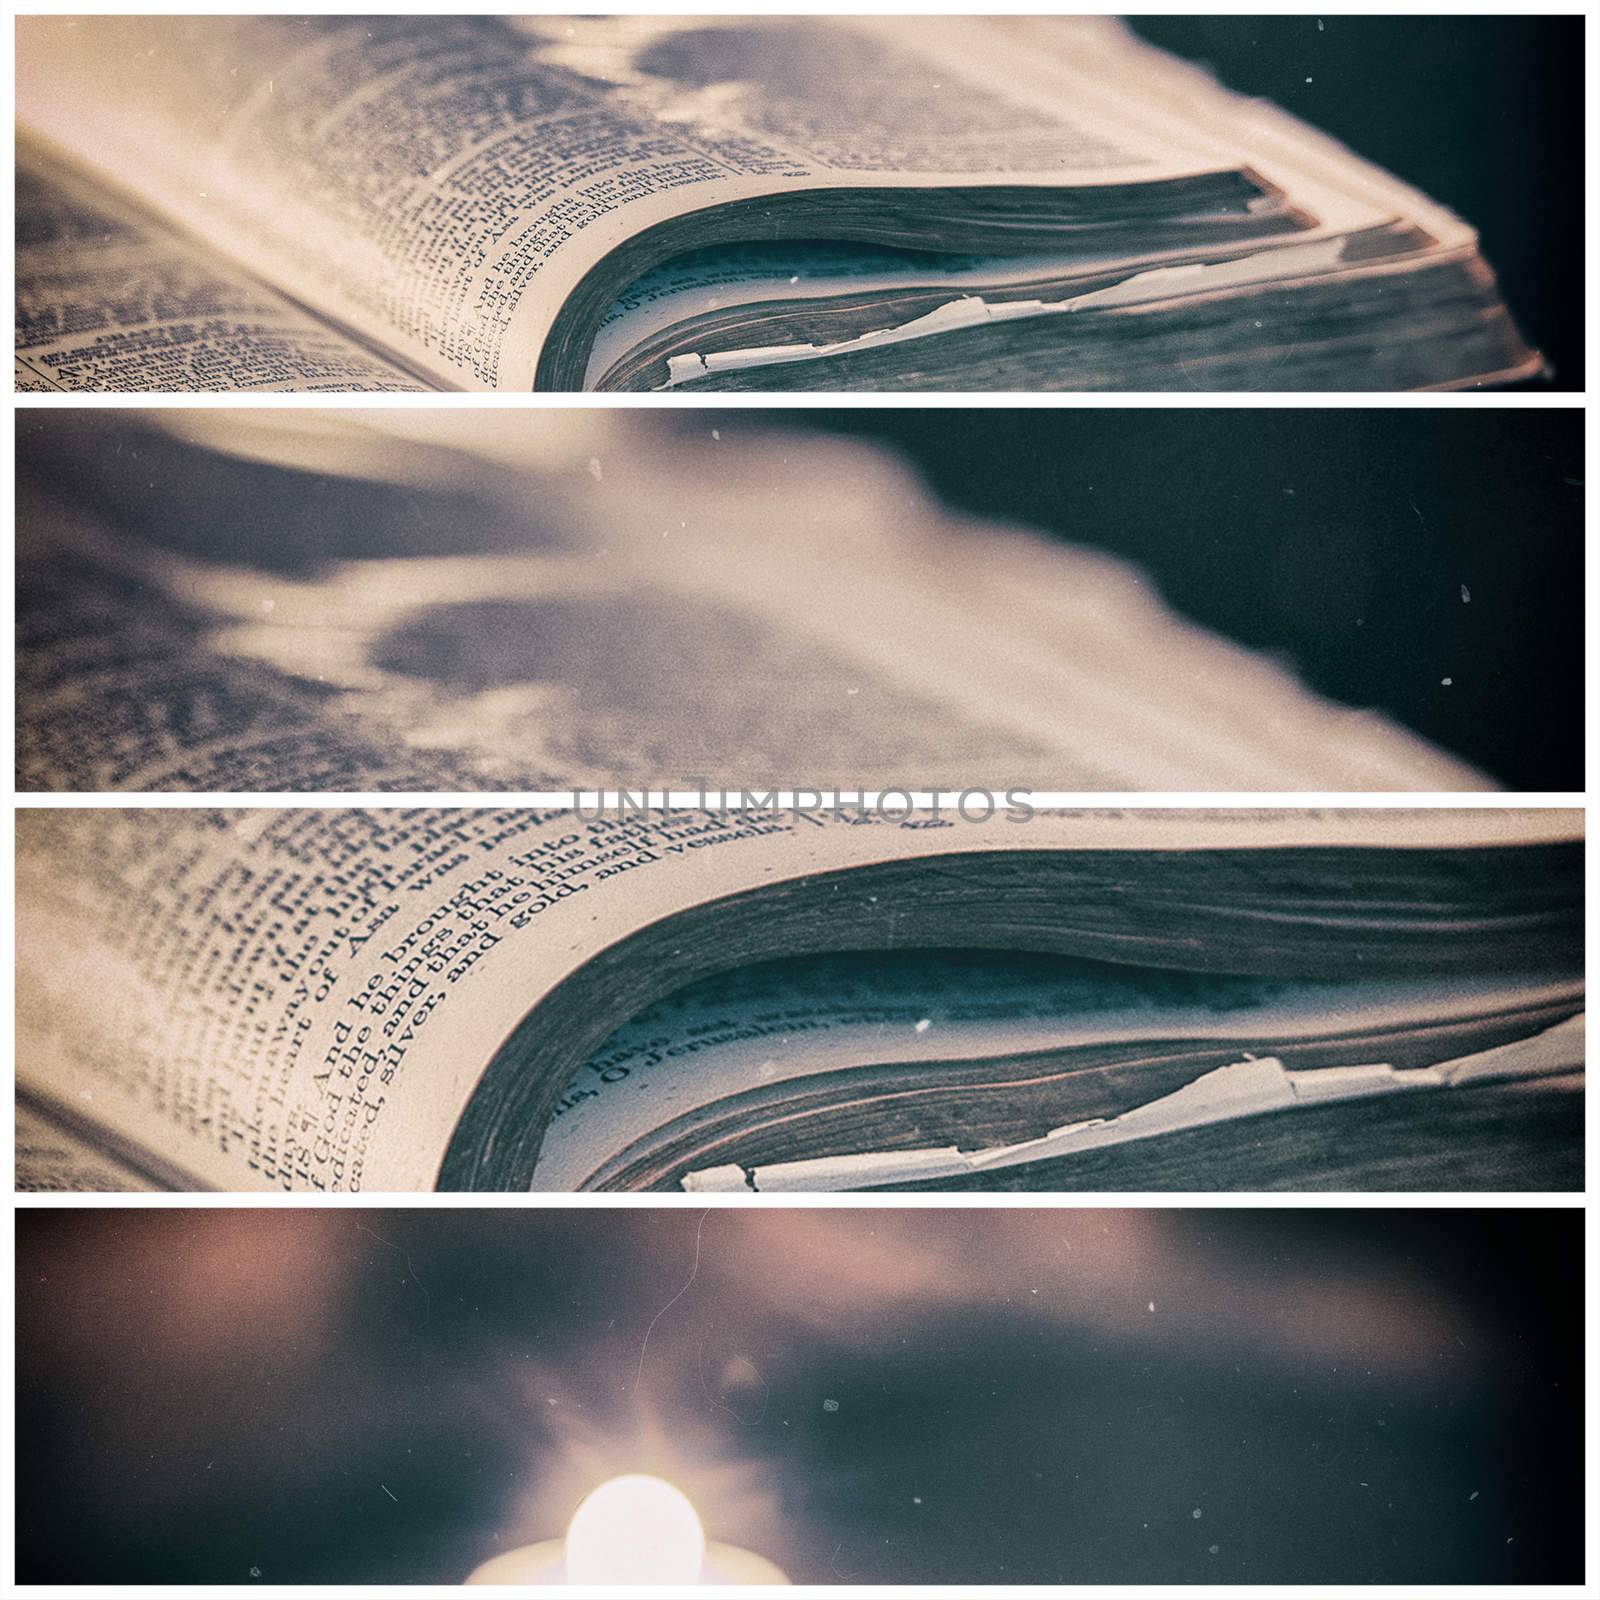 Bible with candles in the background. Low light scene with a multi panel aged and grain effect.